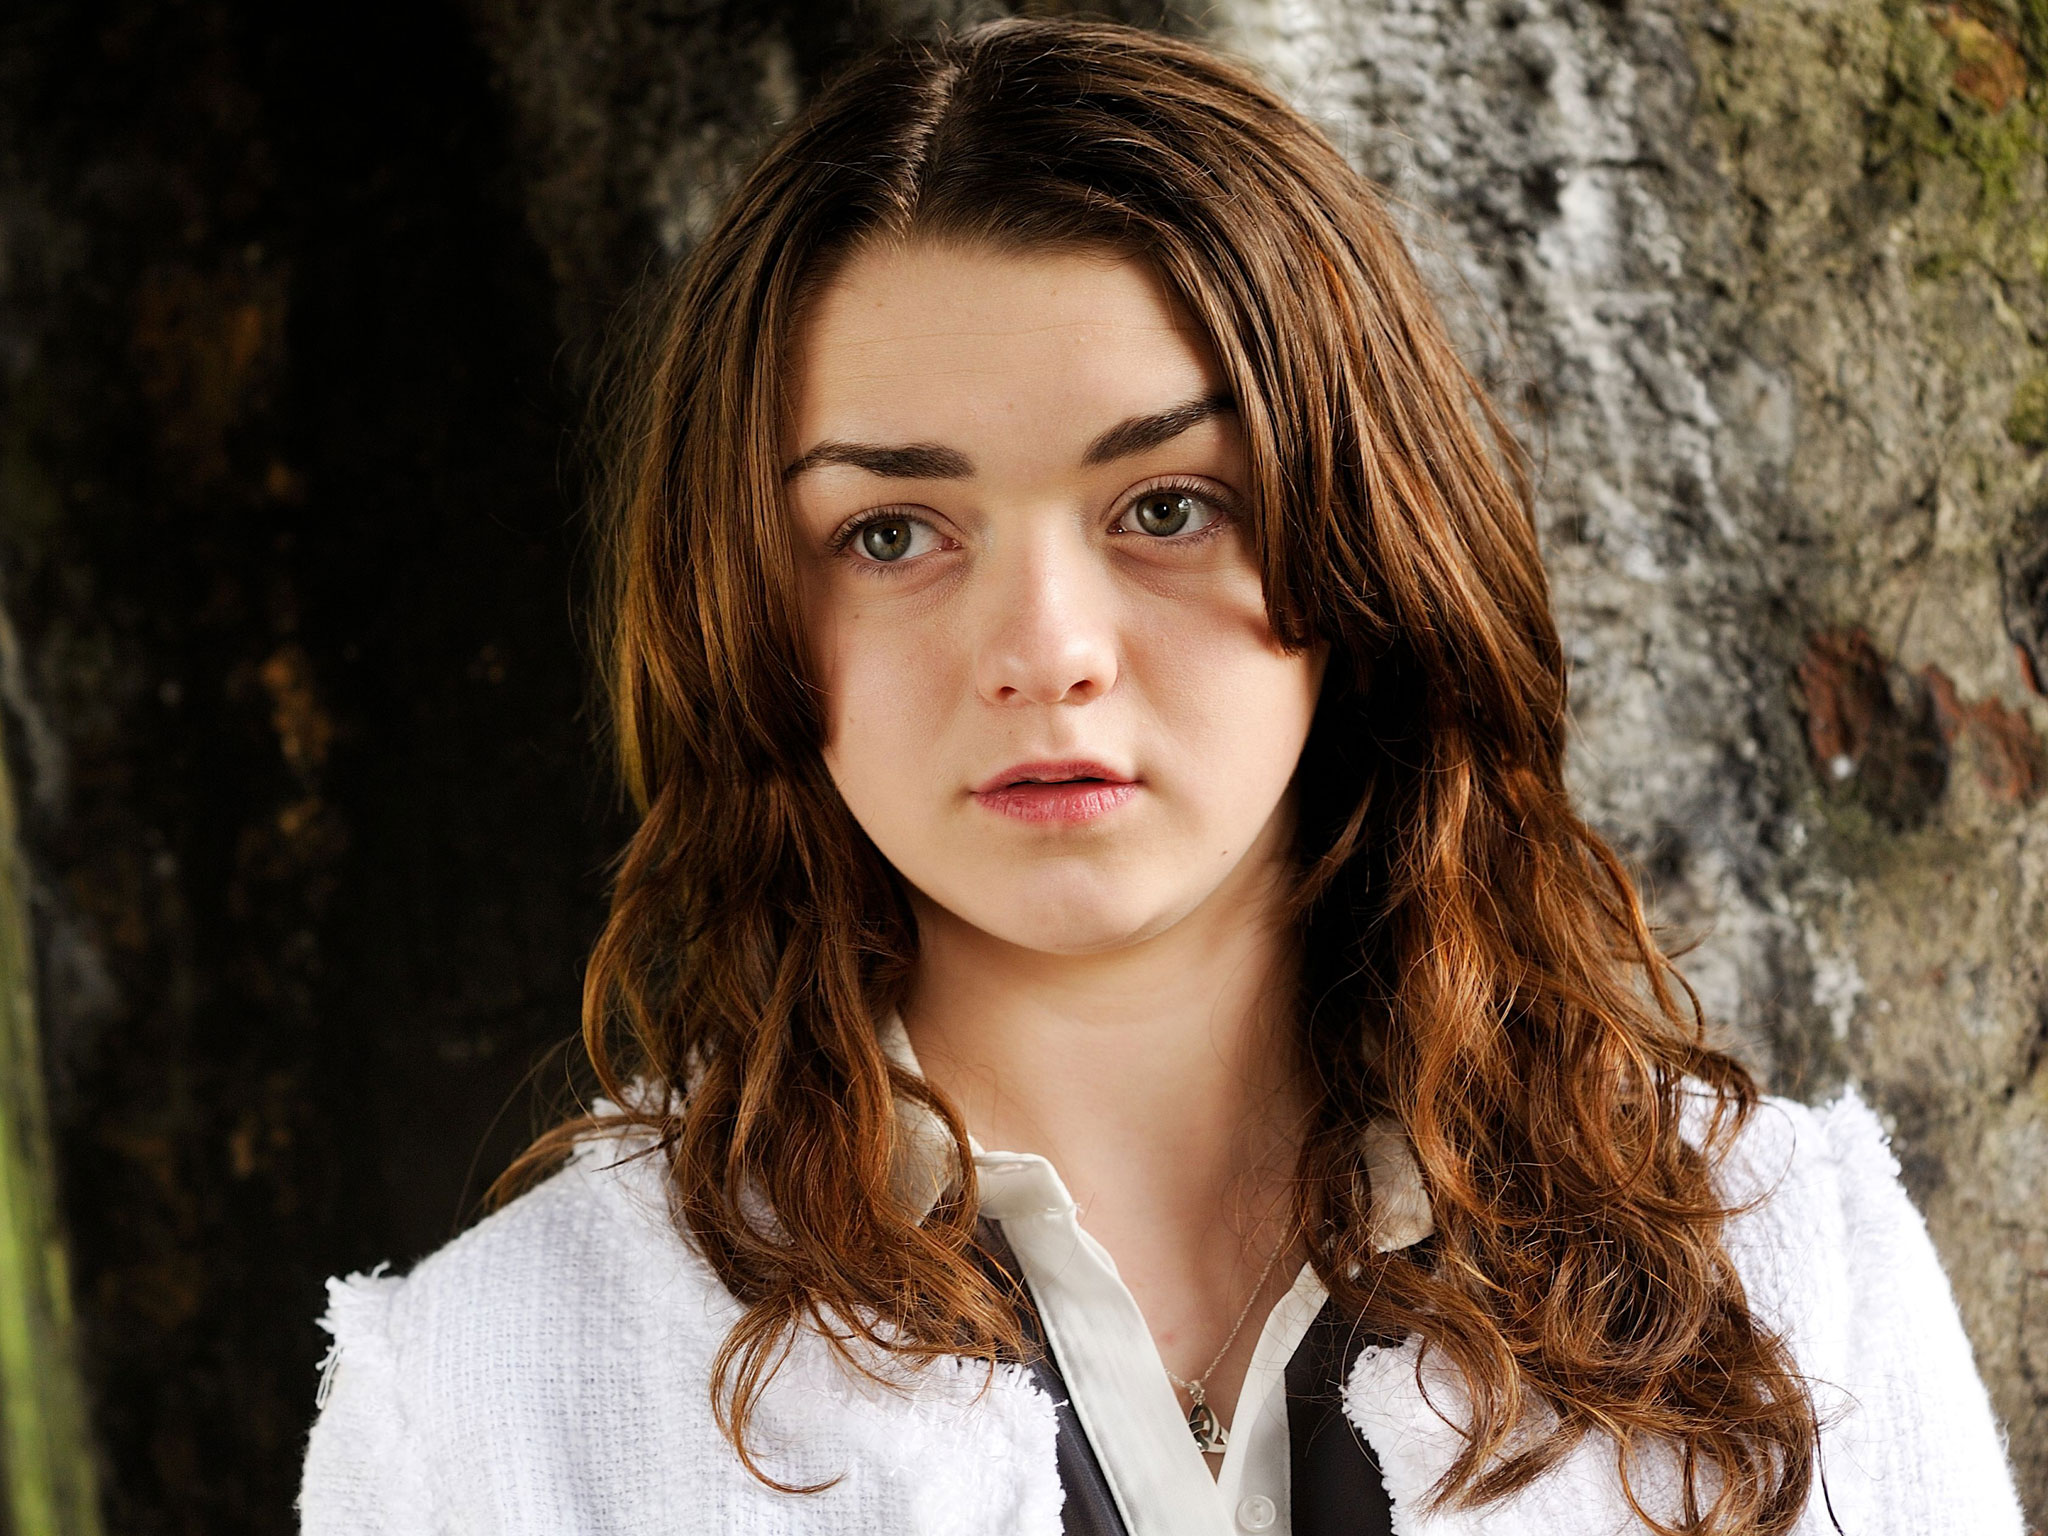 Game of Thrones actress Maisie Williams on suffering from, and getting sucked in, to cyberbullying: 'I was horrible too' - People - News - The Independent